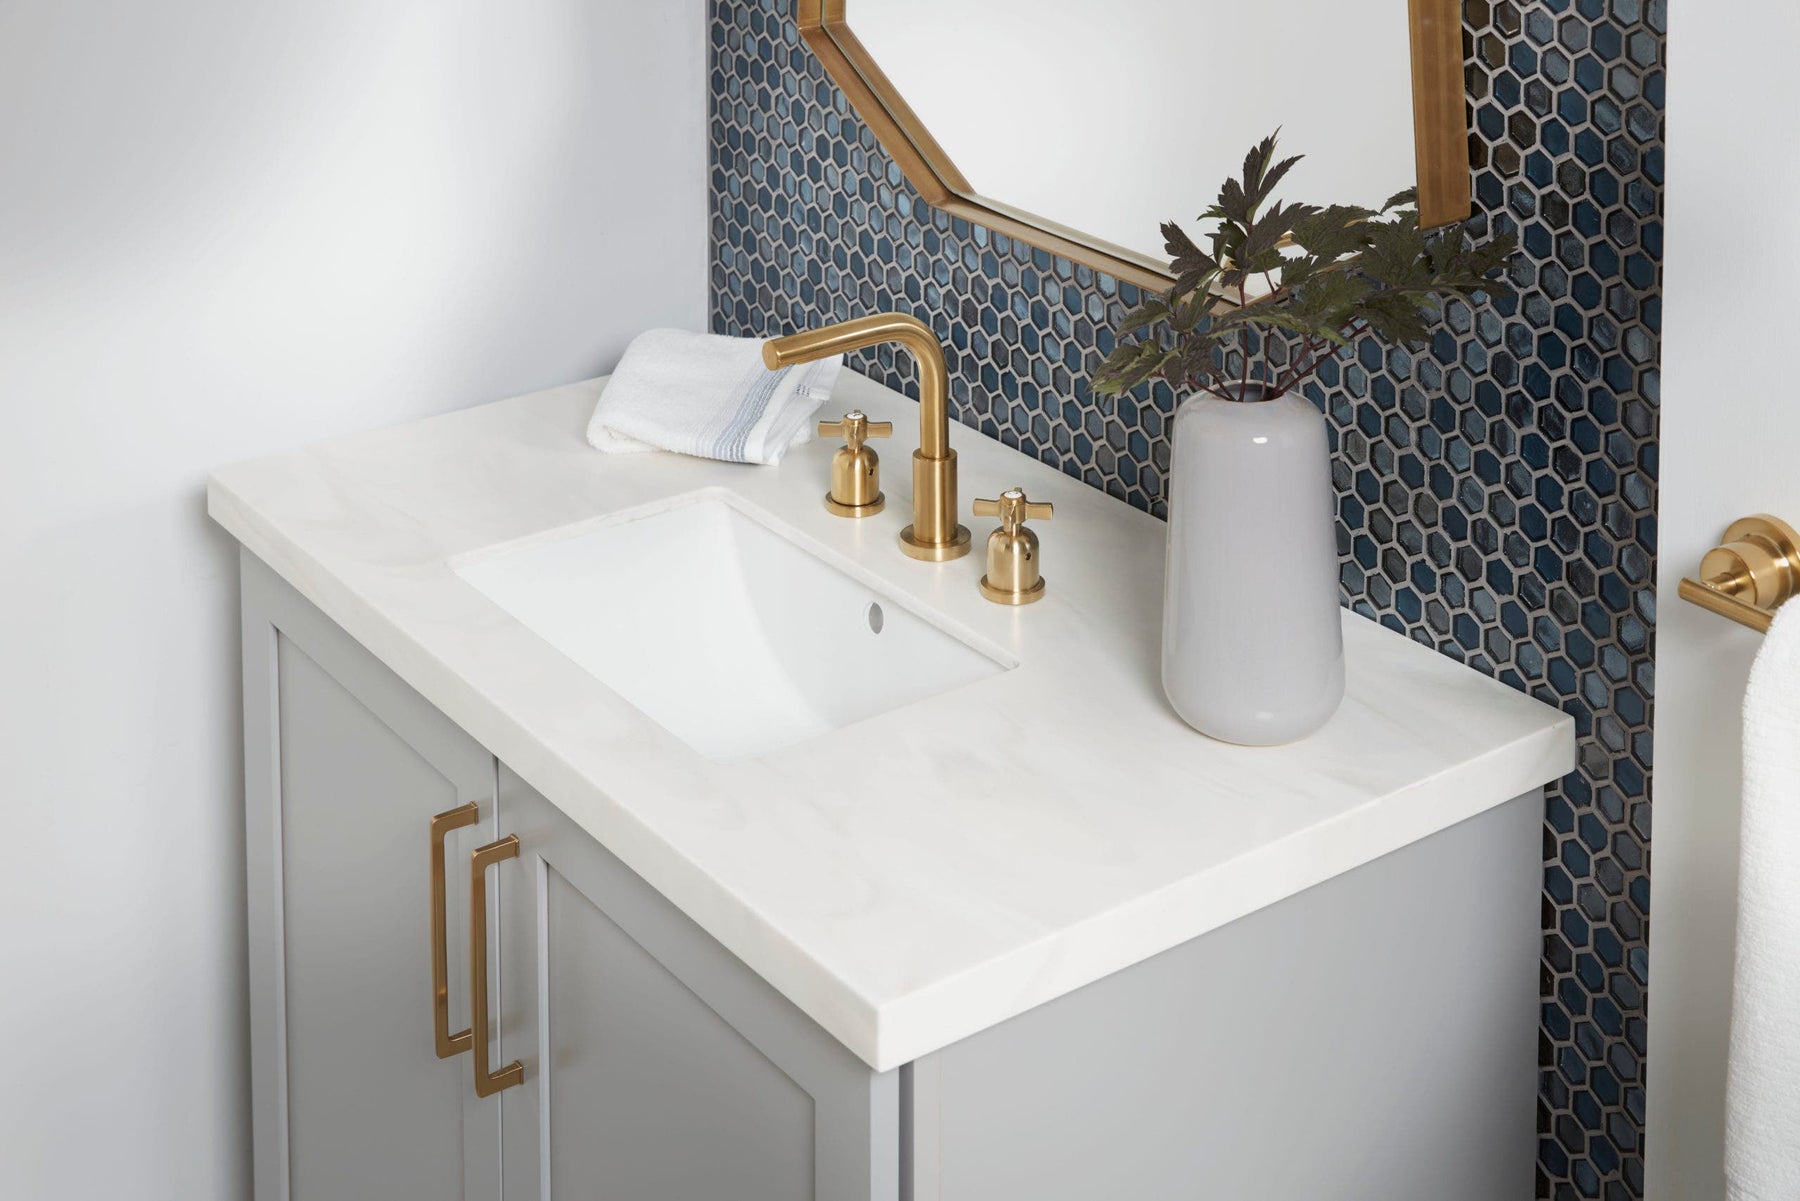 Buyer’s Guide: The Best Materials for Bathroom Sinks